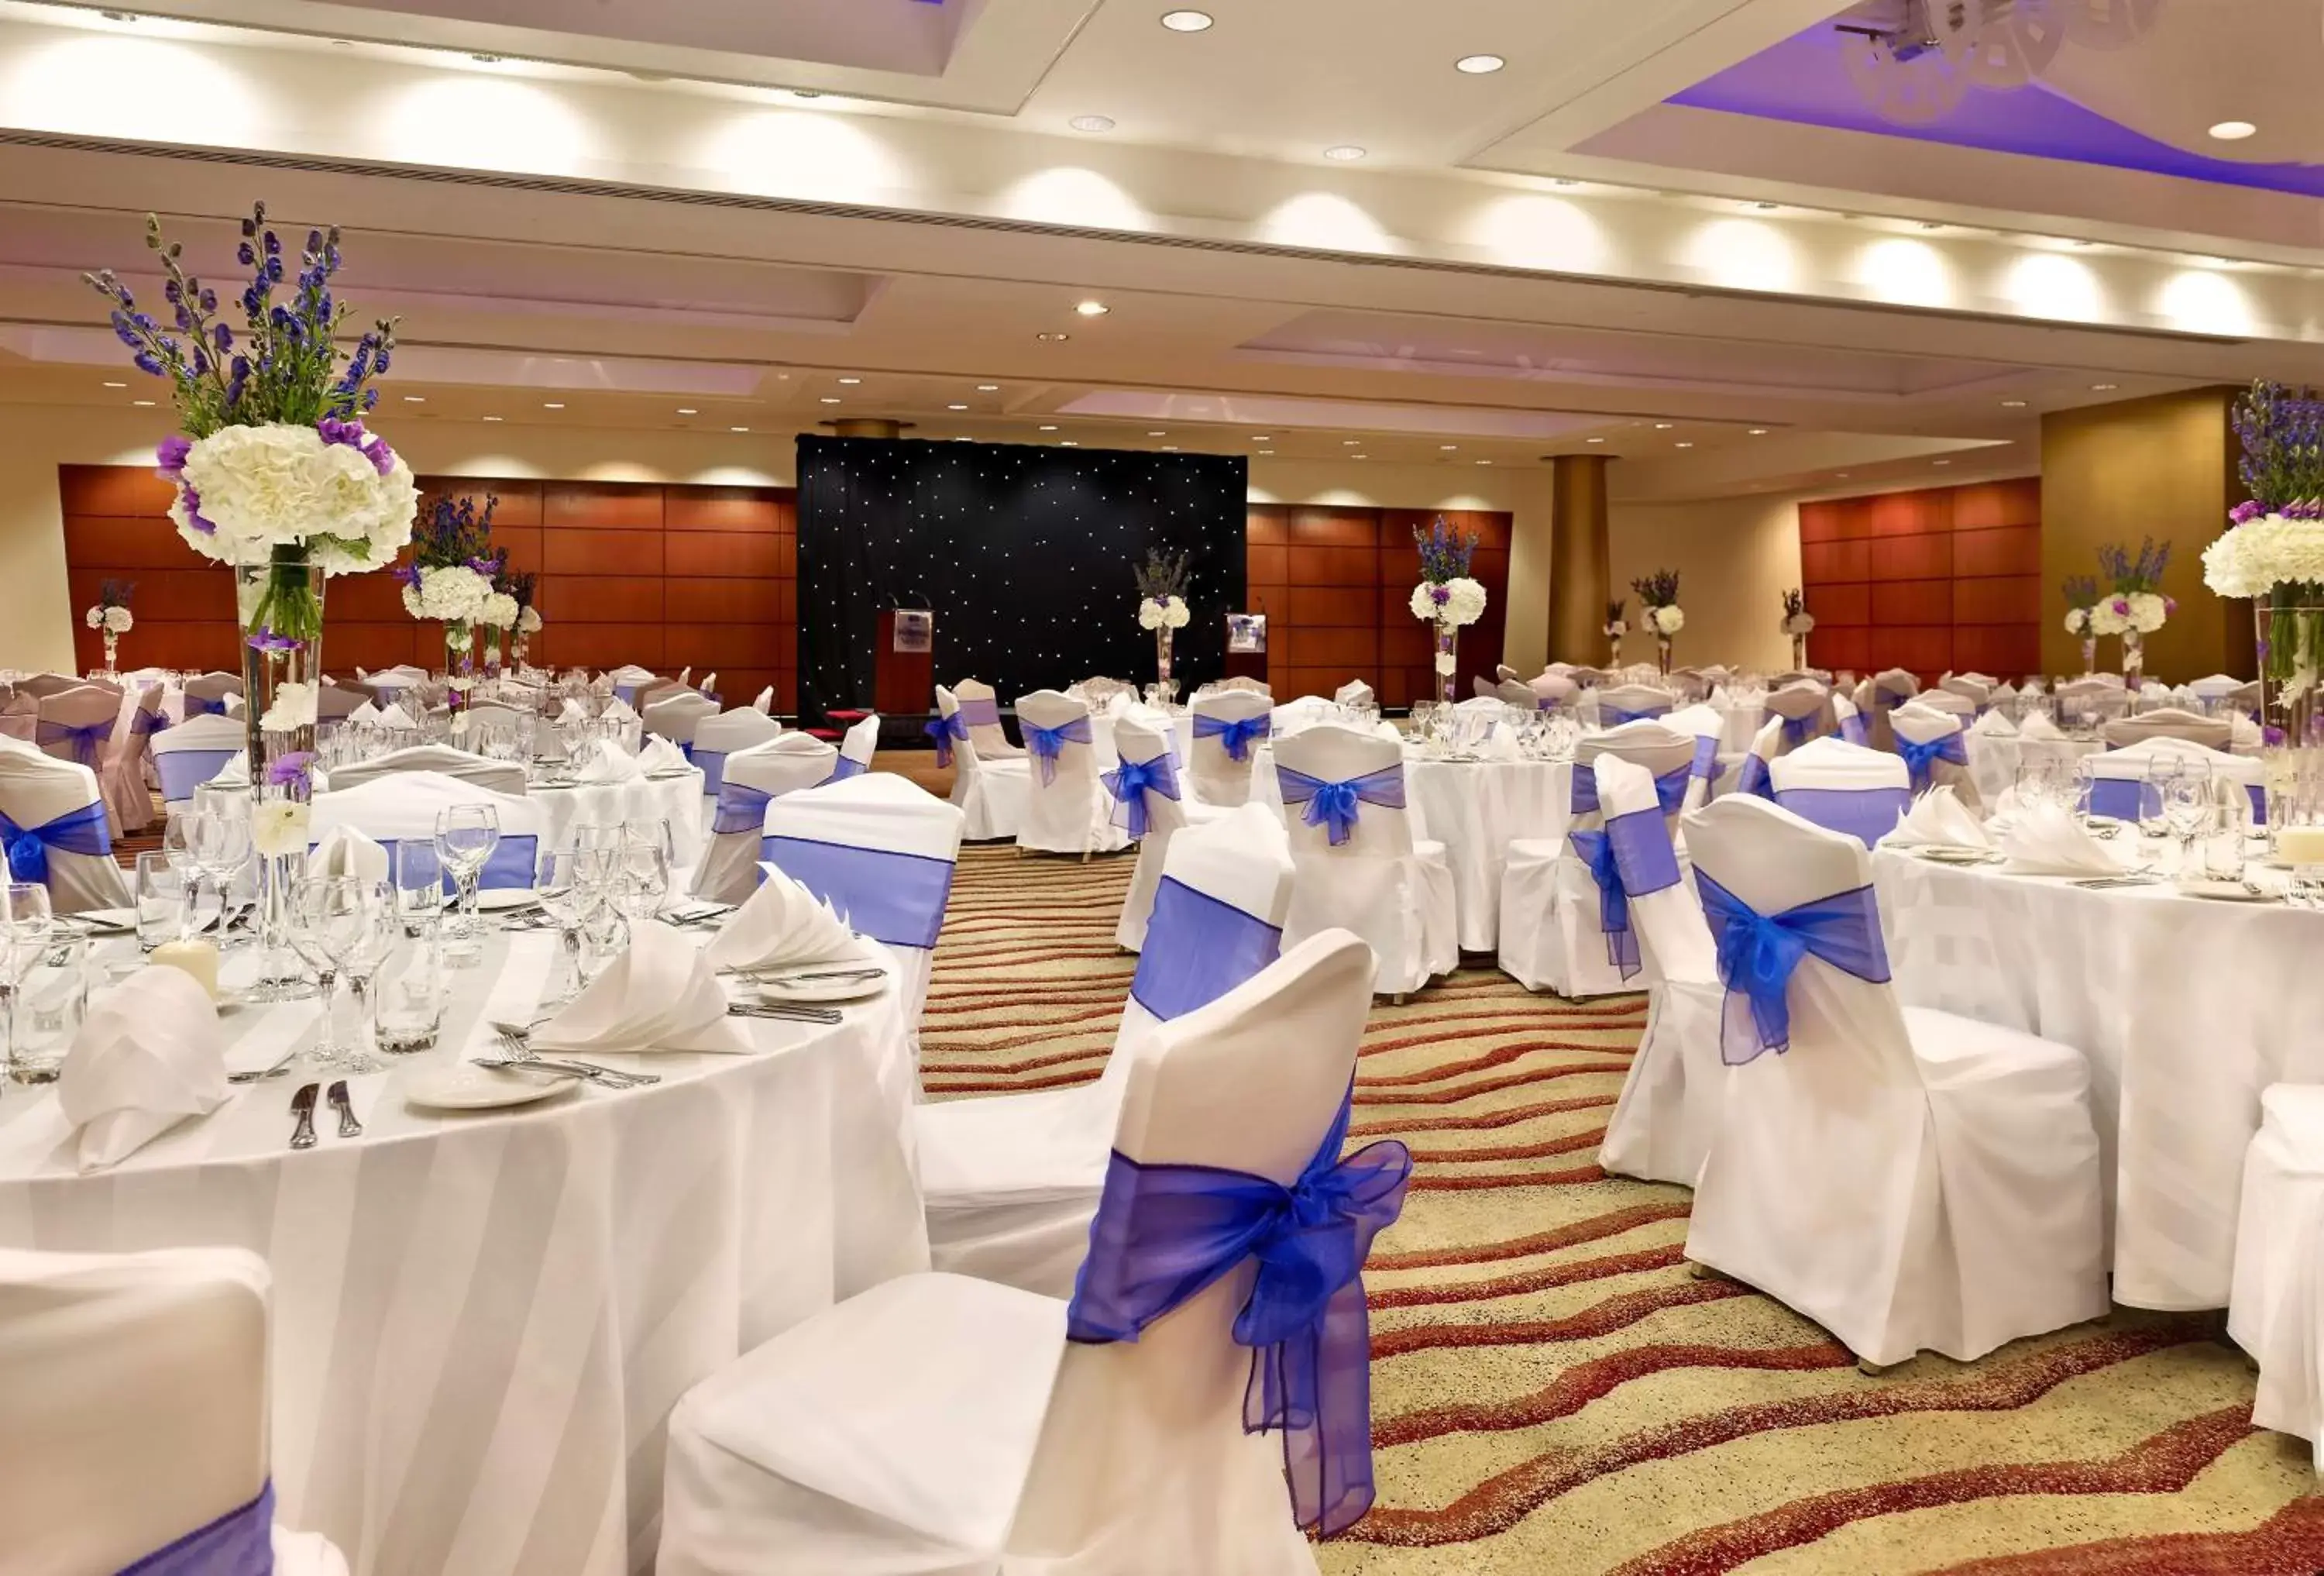 Meeting/conference room, Banquet Facilities in Park Plaza Victoria London